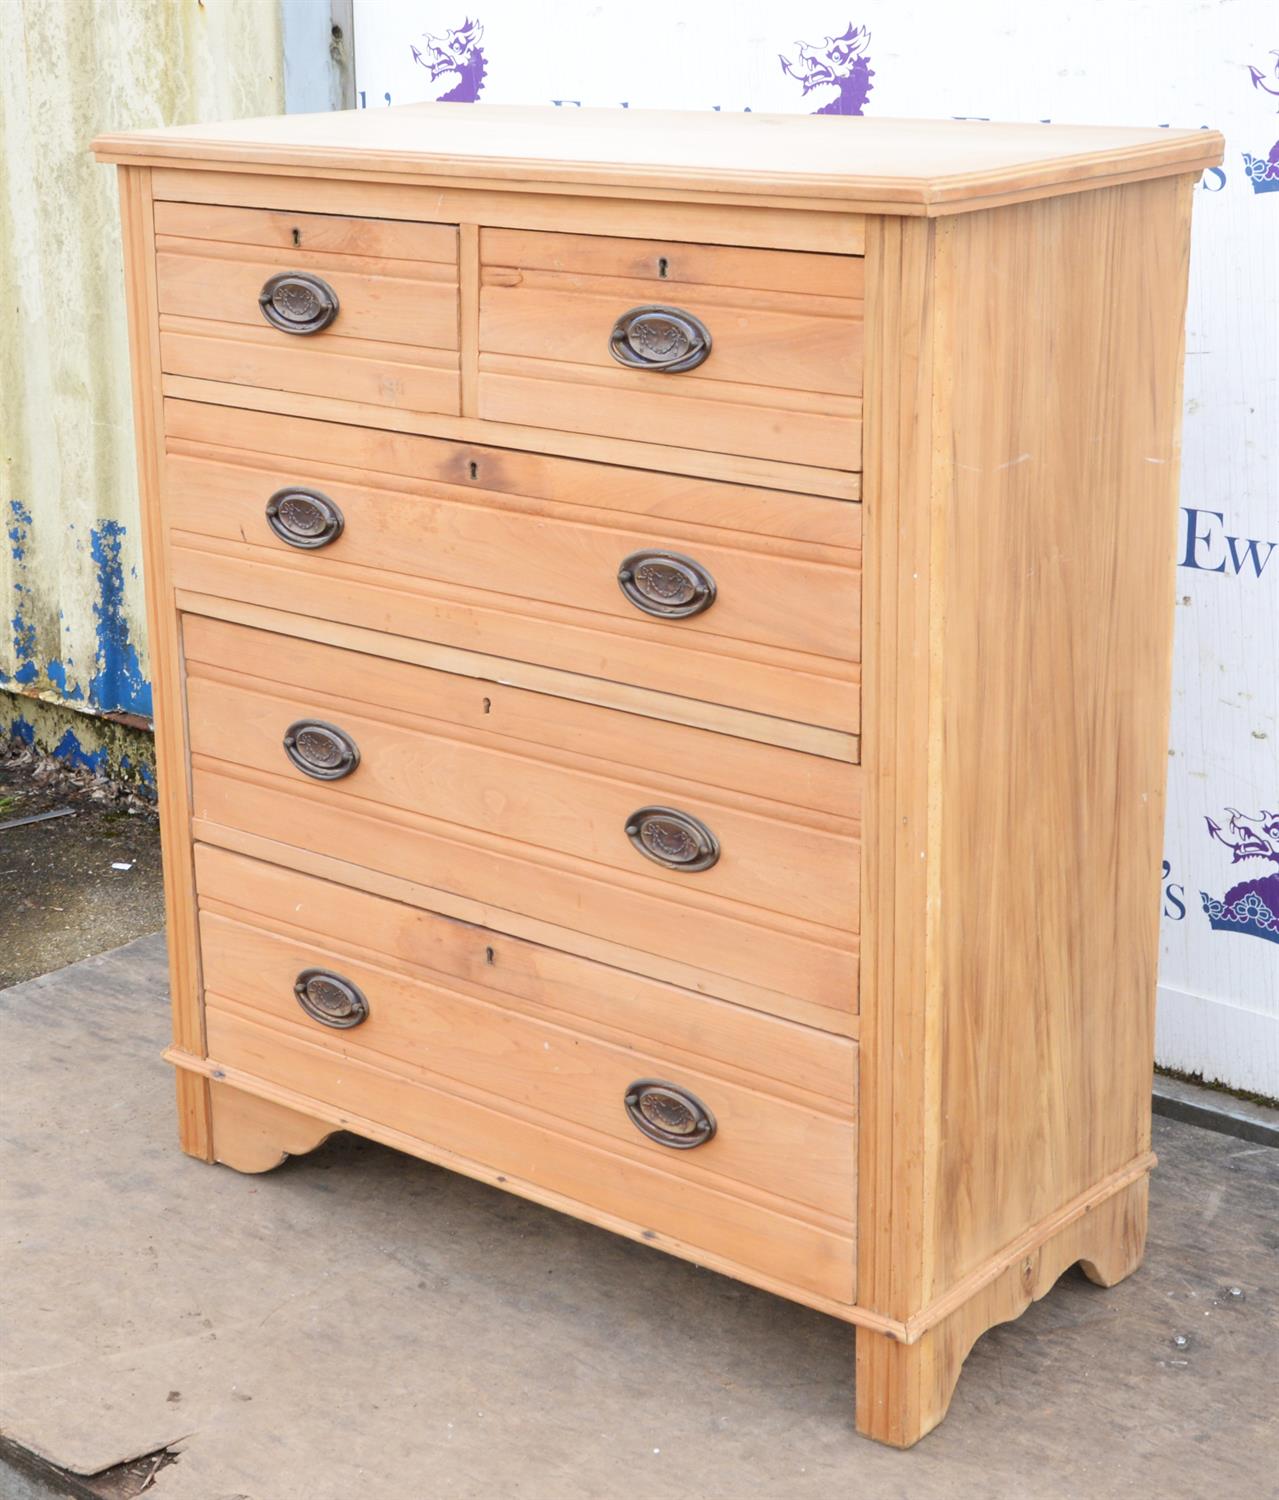 An Edwardian walnut chest of drawers, stripped down, H 110 cm, W 99cm, D 47cm - Image 2 of 3